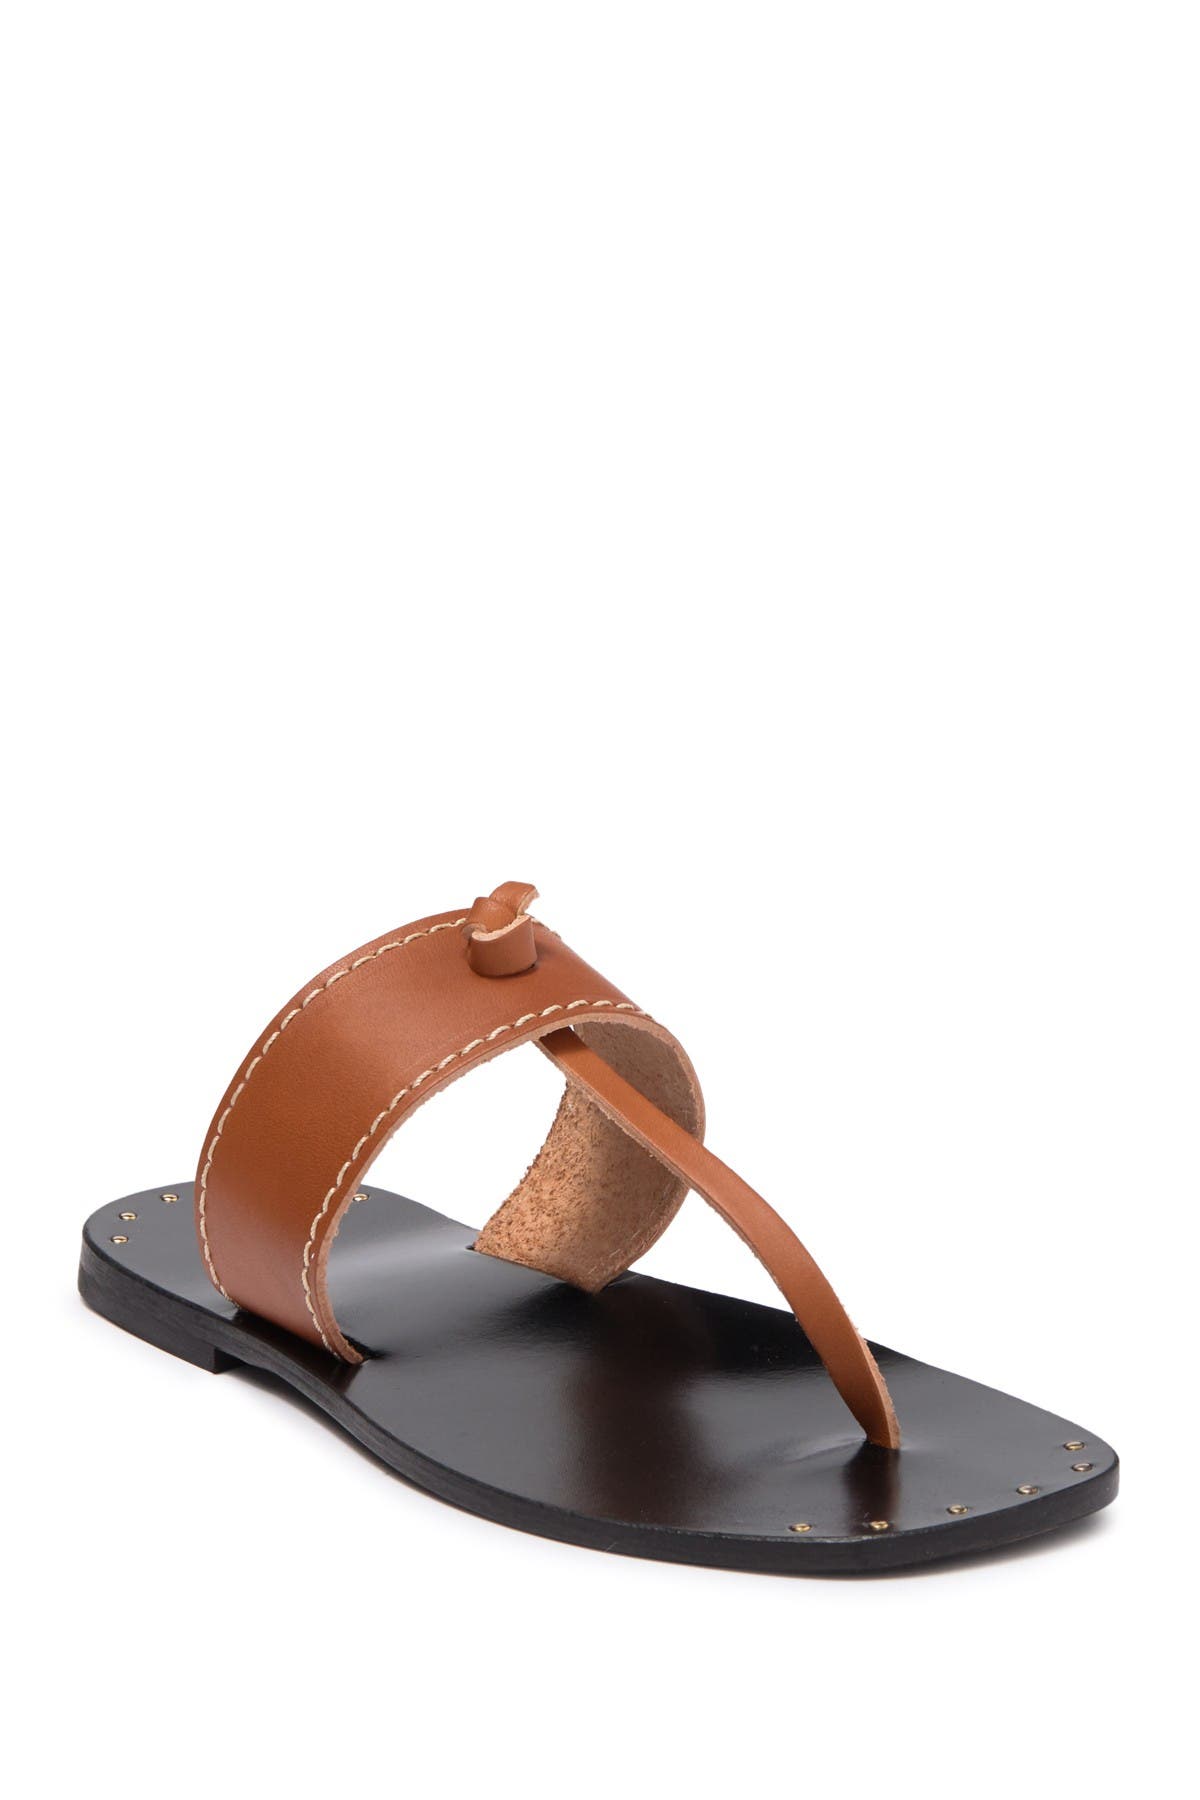 Joie | Baylin Leather Thong Sandal 